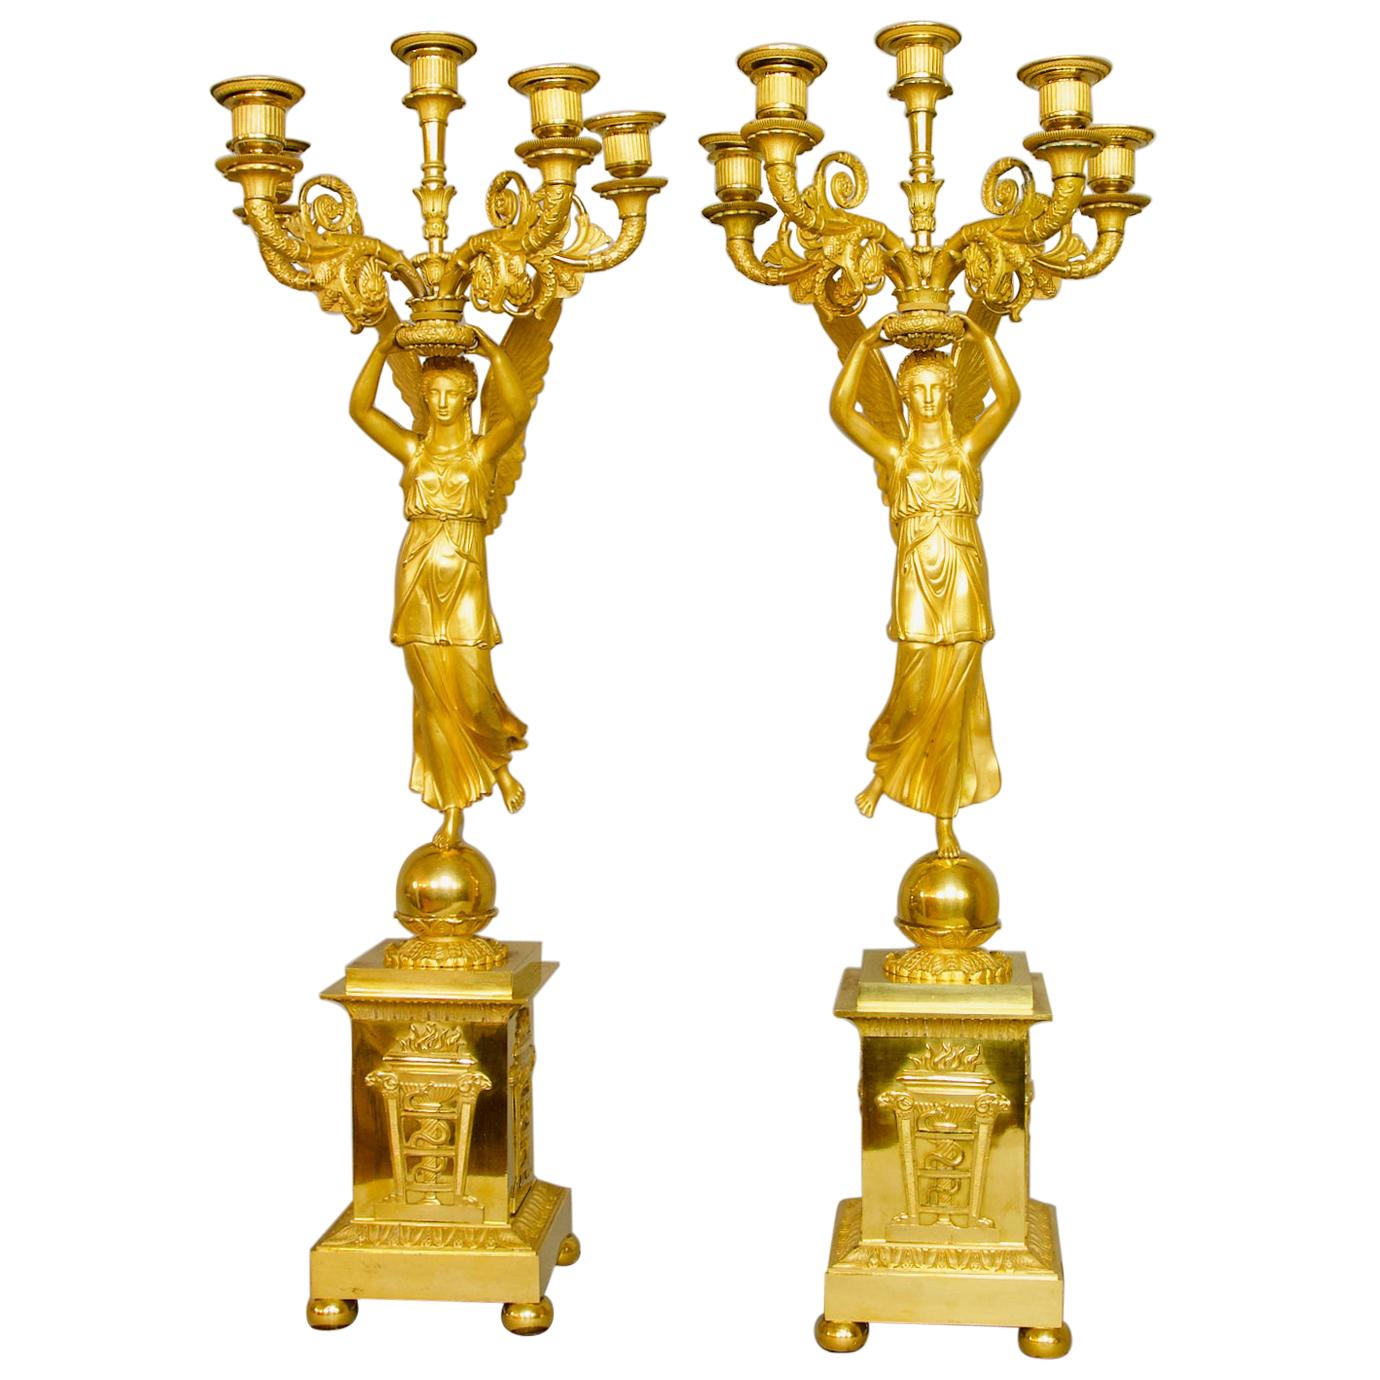 Pair of French Empire Gilt Bronze Winged Victory Candelabras, attr. P.P. Thomire